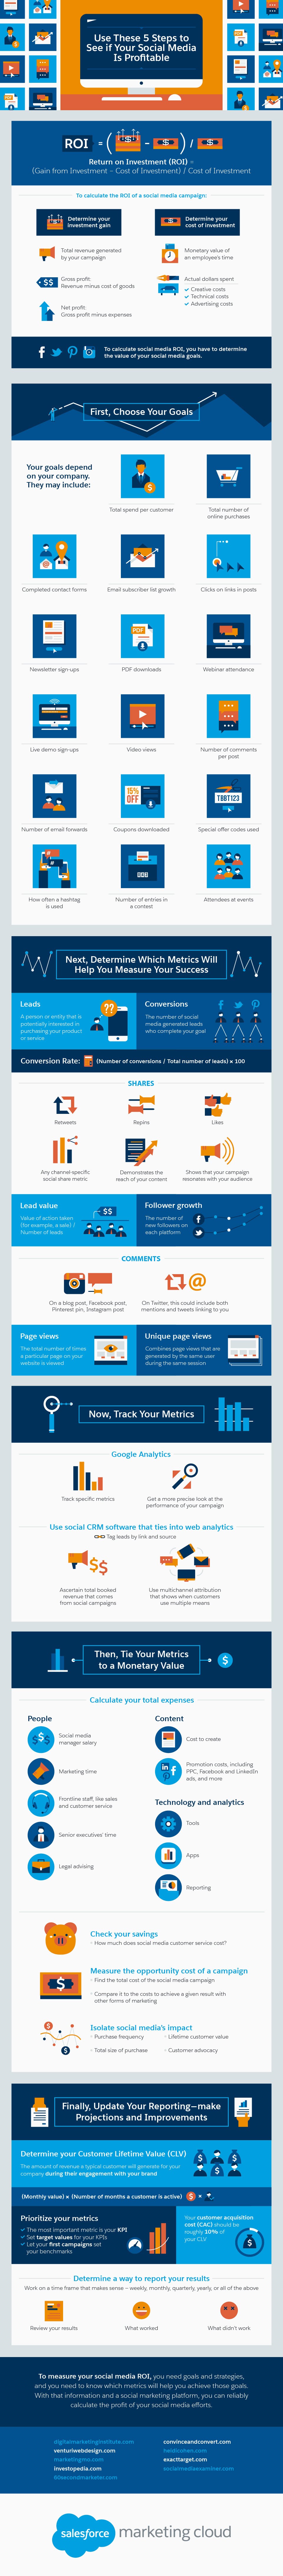 Use These 5 Steps to See if Your Social Media is Profitable - #infographic